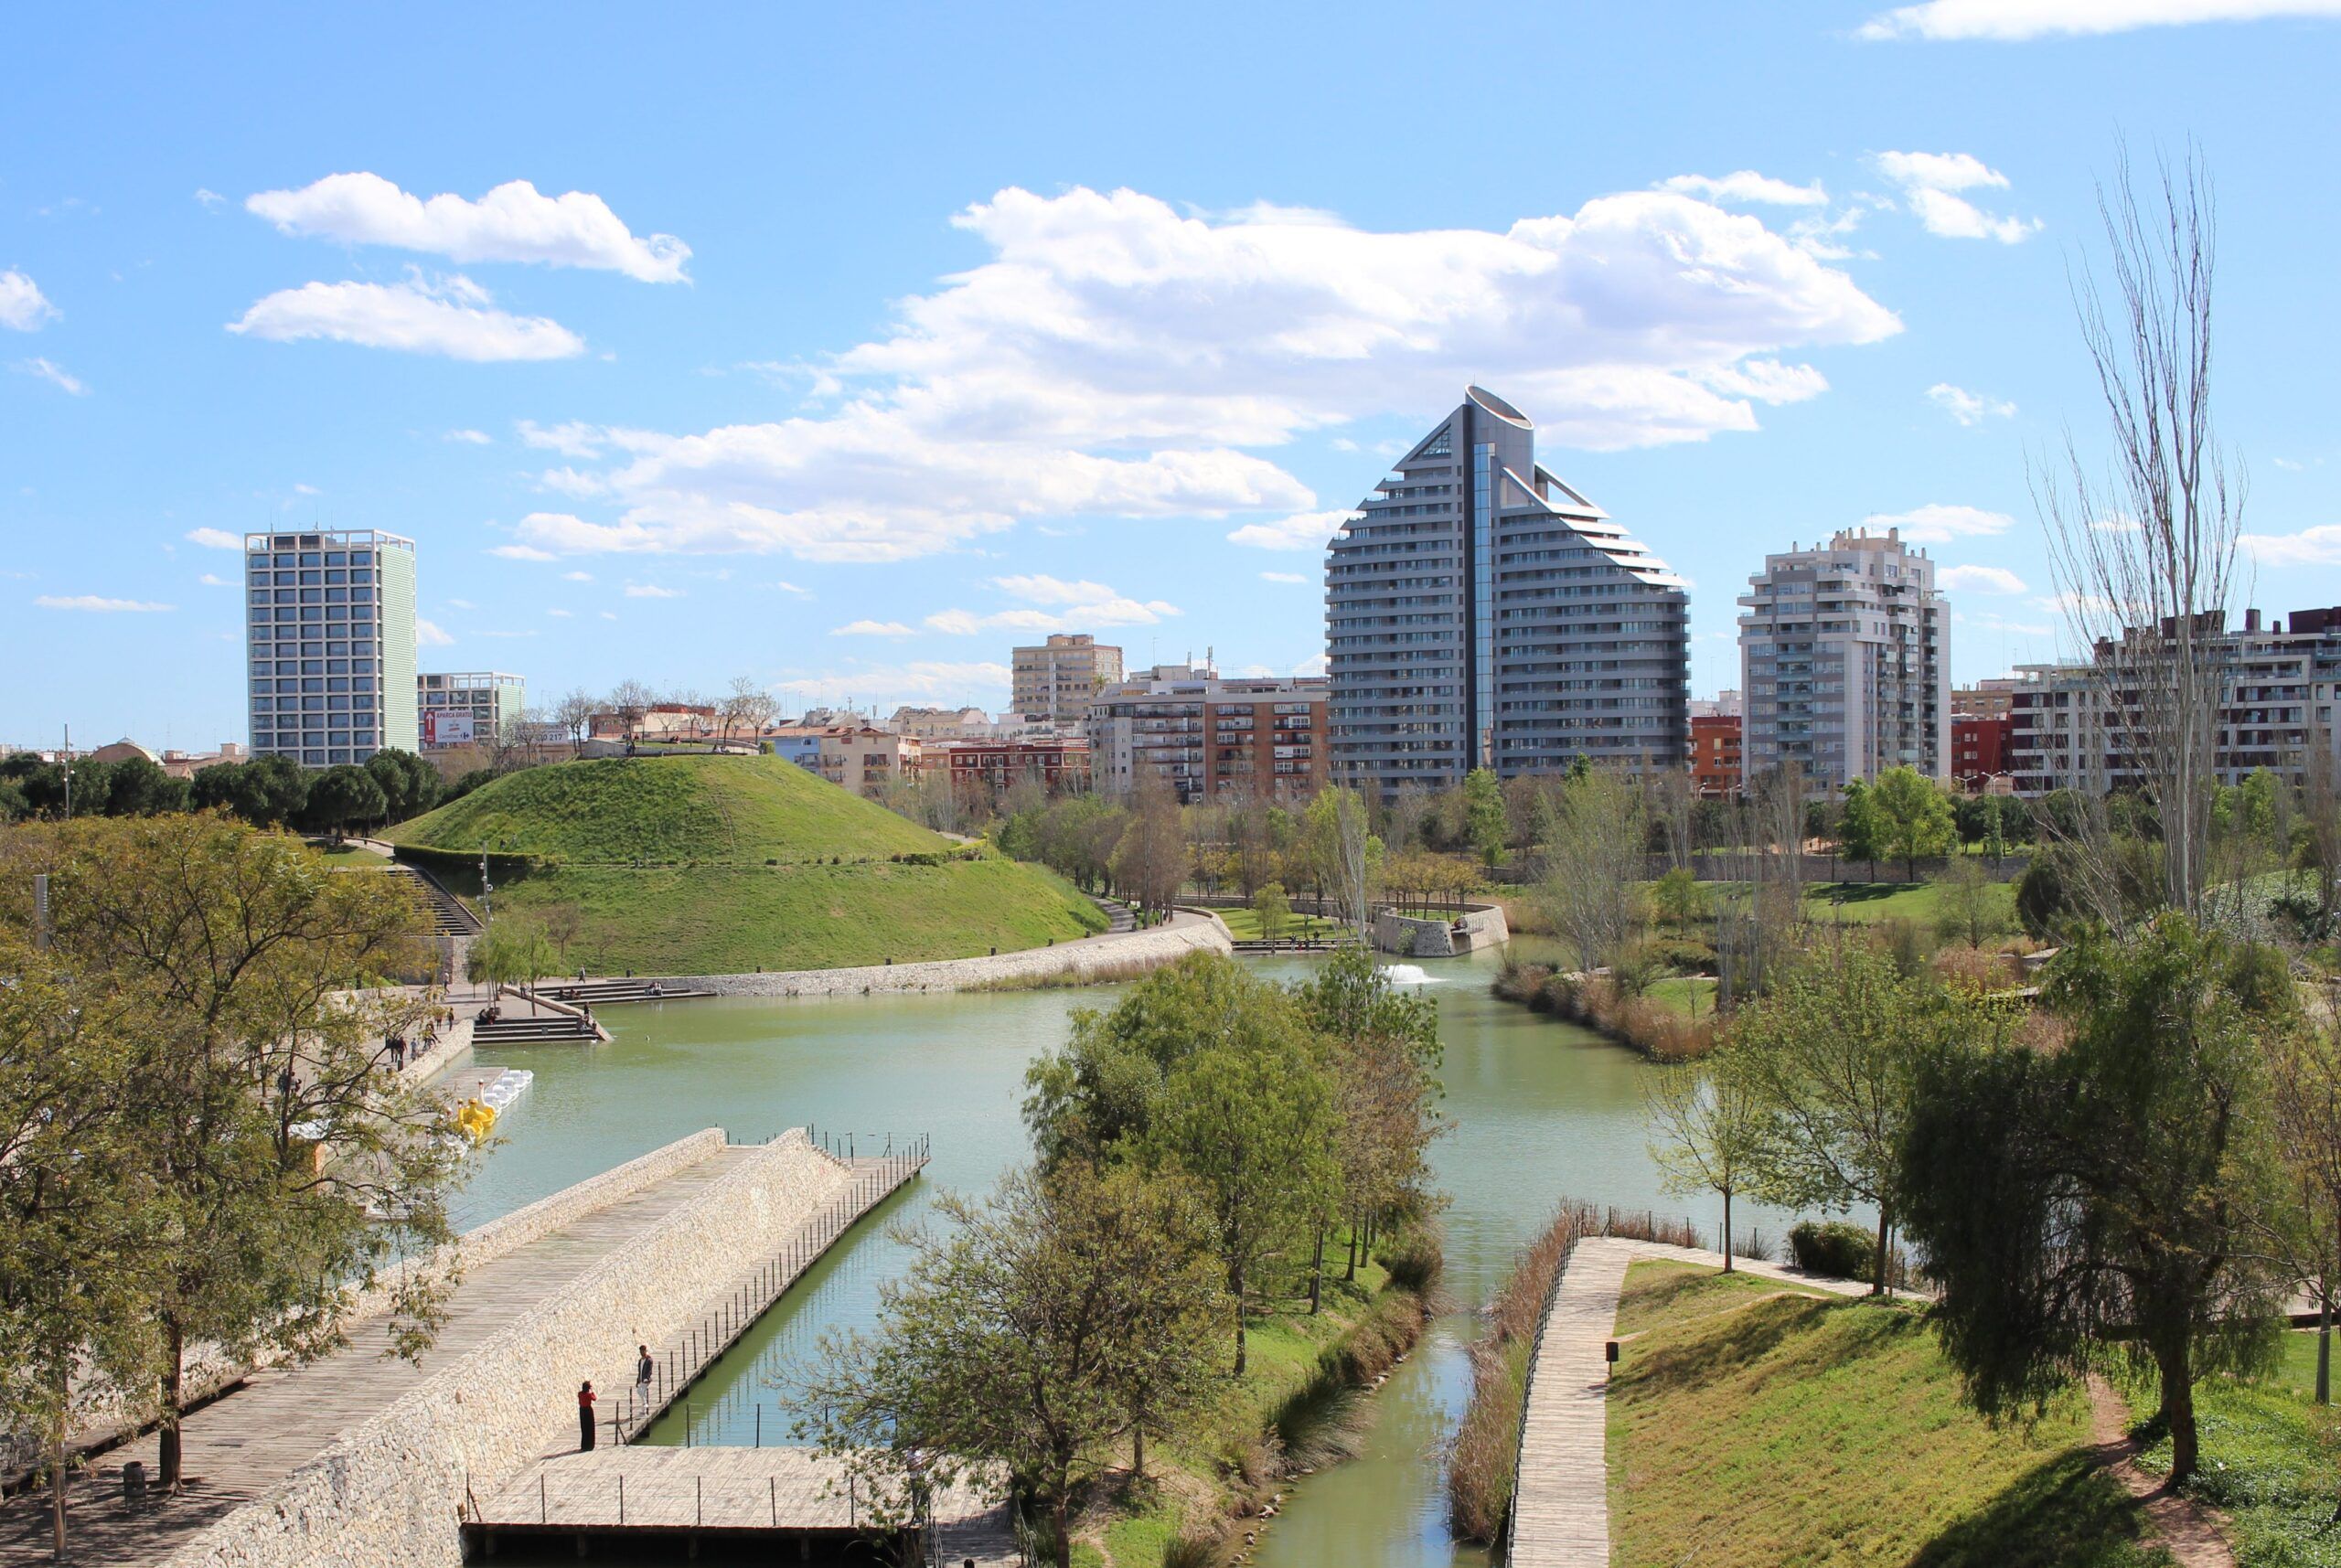 Overlooking the Cabecera Park from the bridge that leads to Bioparc Valencia